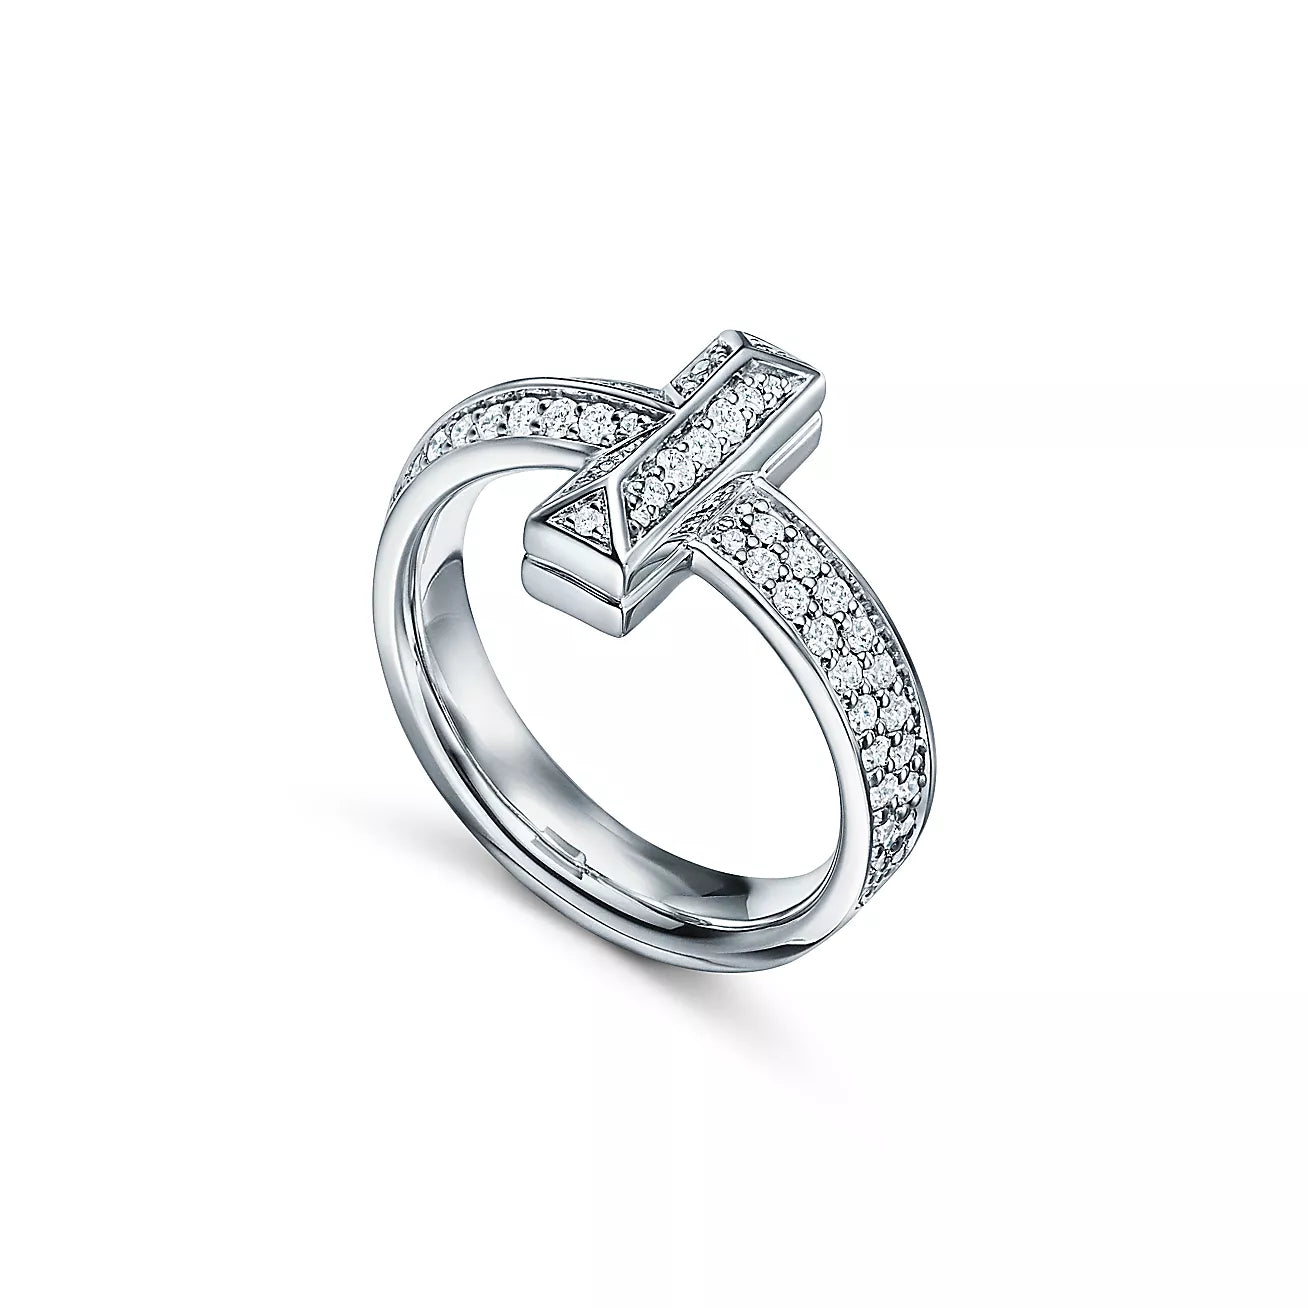 Tiffany T T1 Ring in White Gold with Diamonds, 4.5 mm Wide